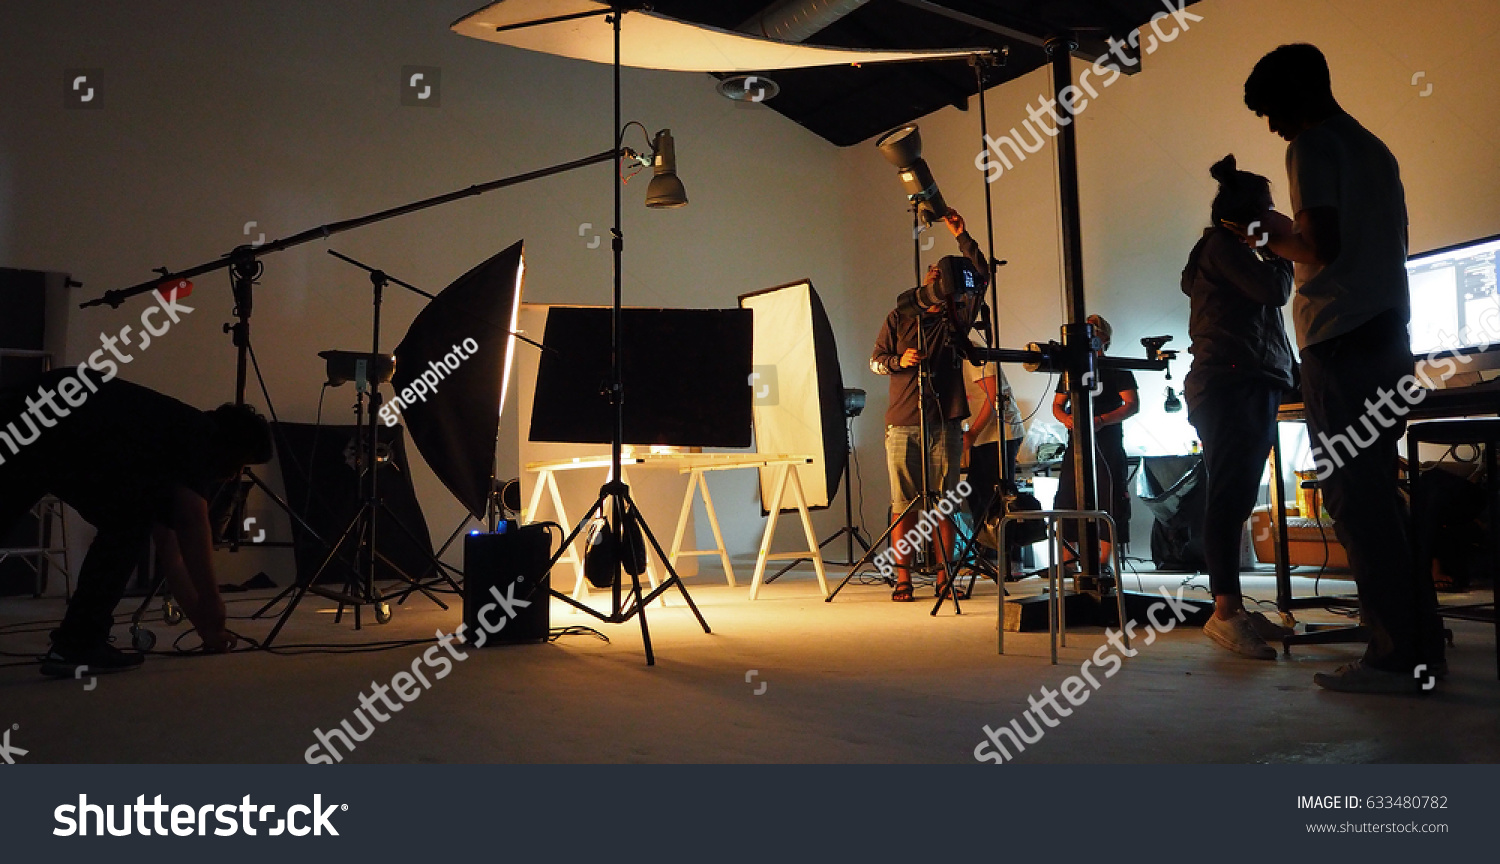 Behind the shooting production crew team and silhouette of camera and equipment in studio. #633480782